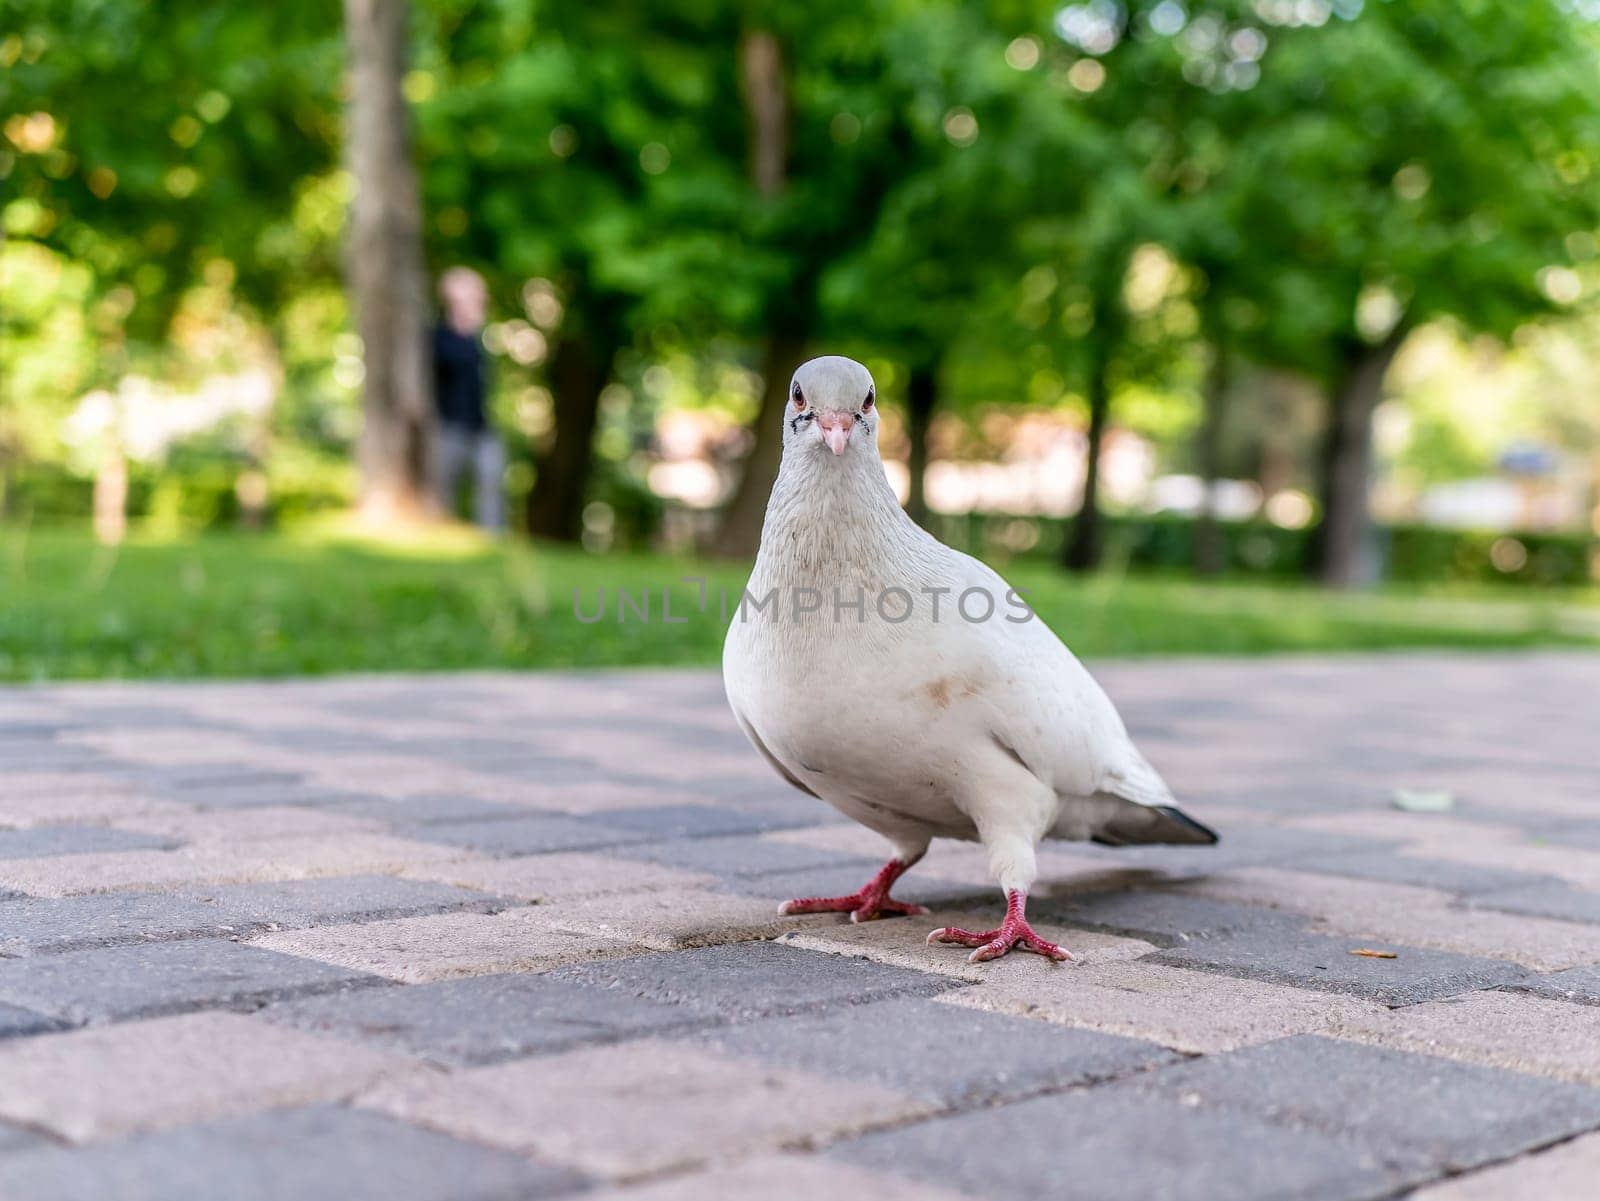 A beautiful white pigeon on the road of the city park by lempro